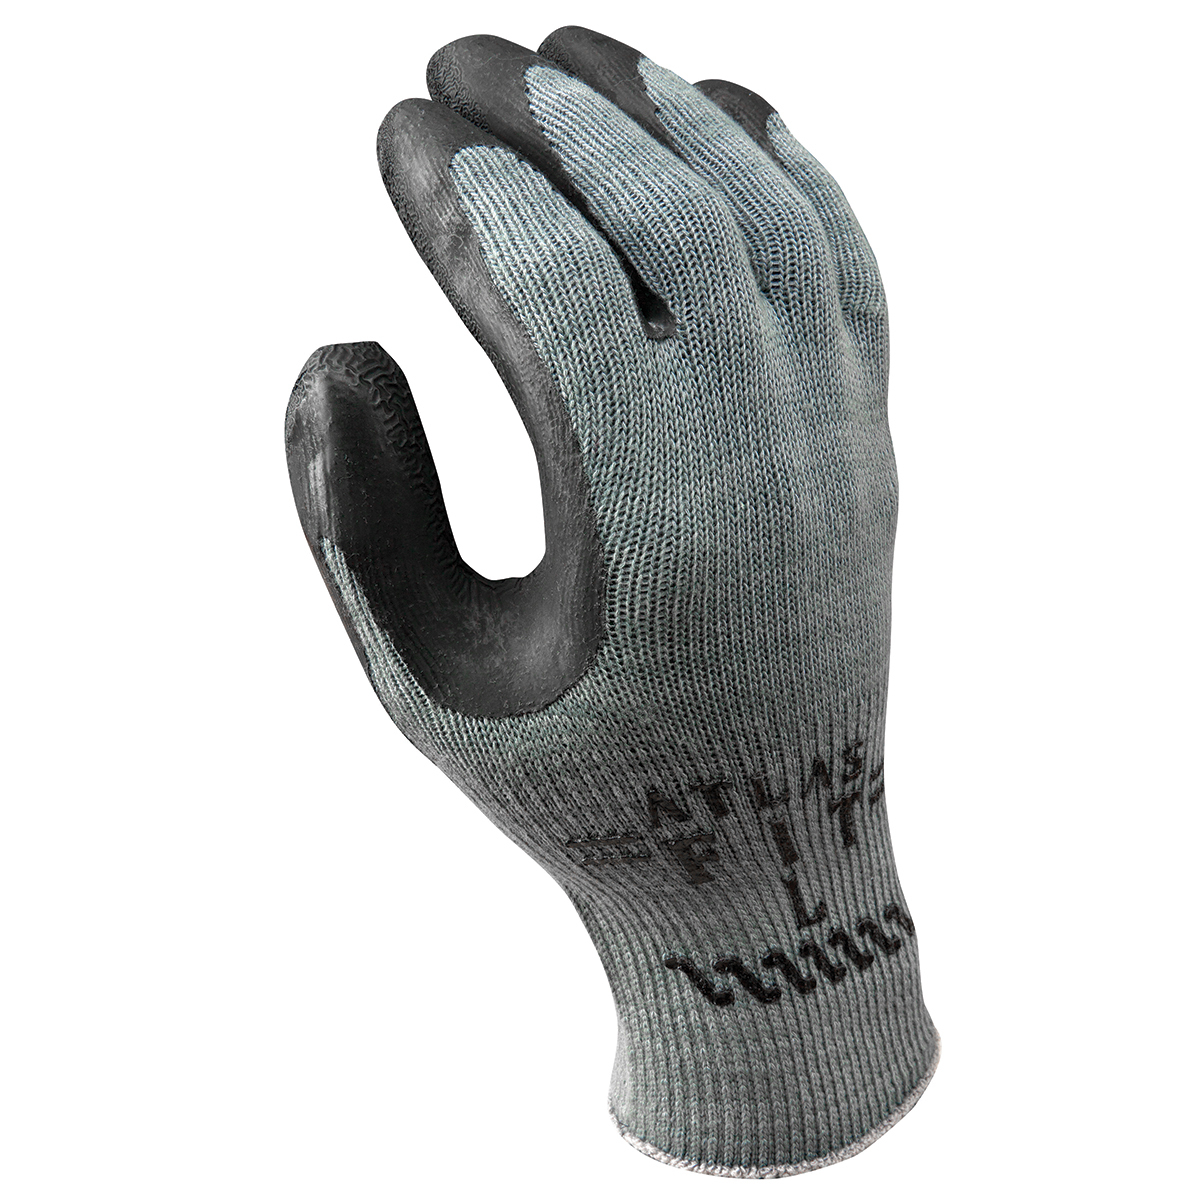 SHOWA® Size 9 ATLAS® 10 Gauge Natural Rubber Palm Coated Work Gloves With Cotton And Polyester Liner And Knit Wrist